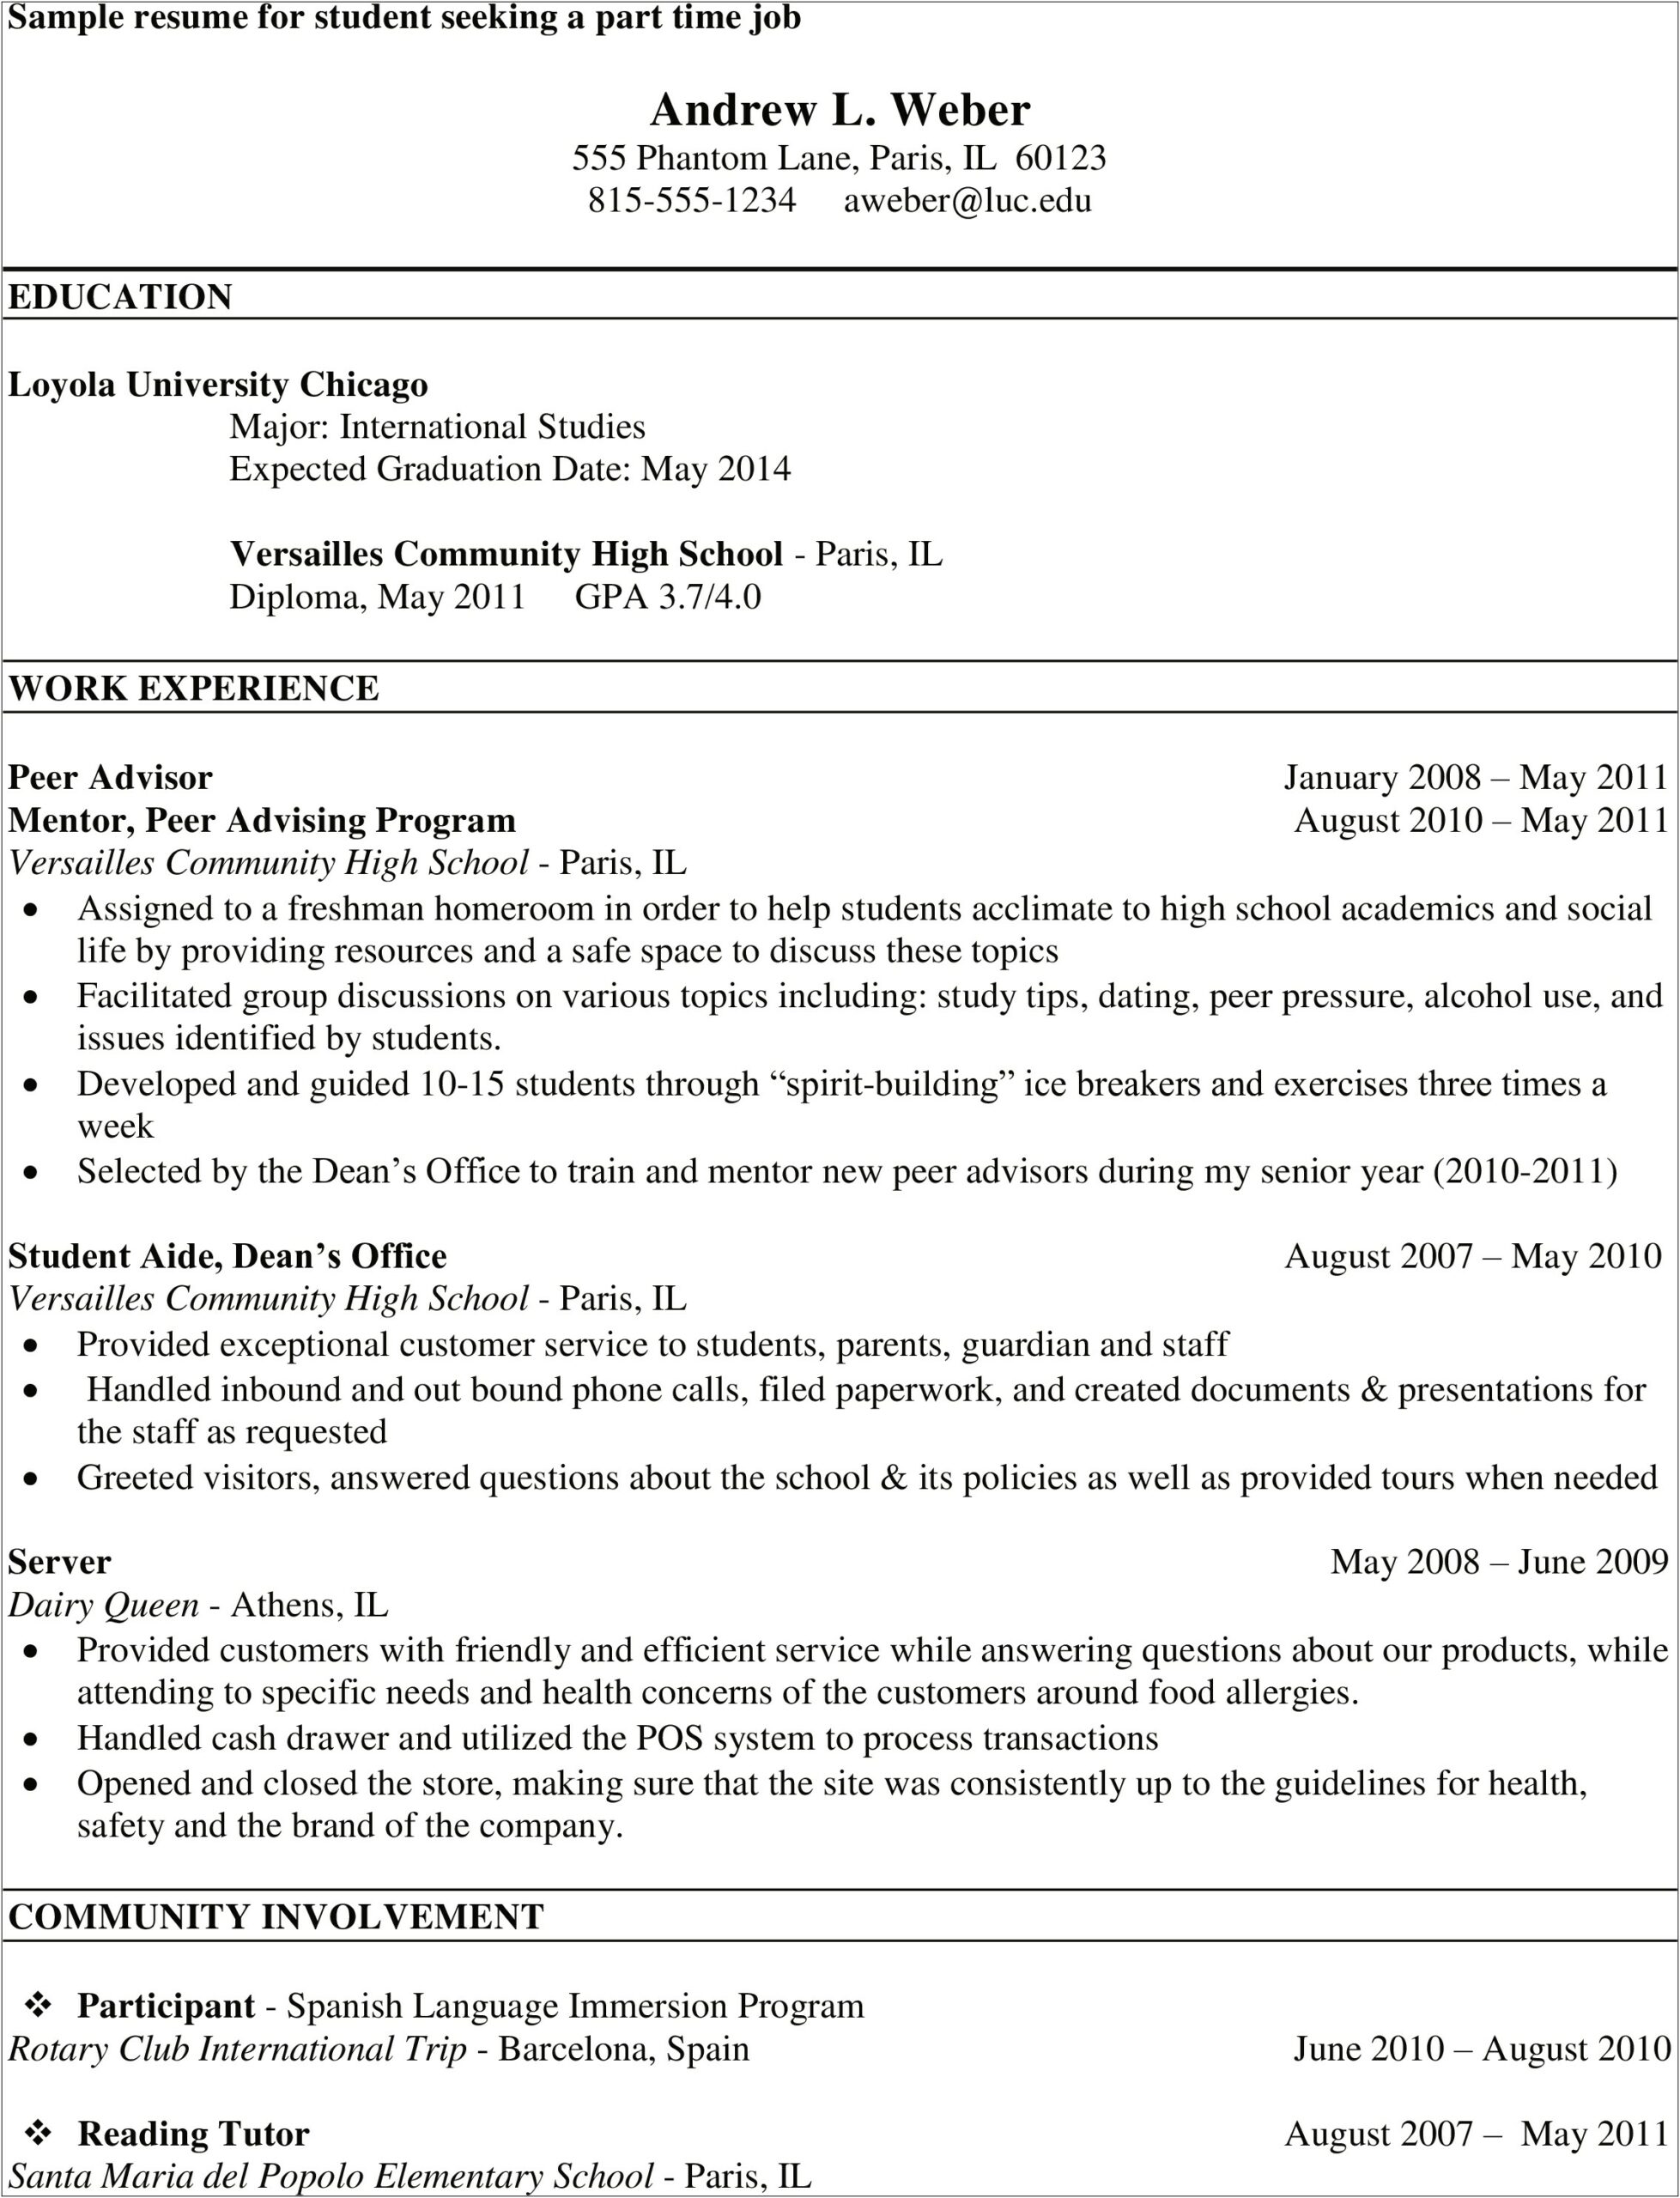 Generic Resume Objective Part Time Job College Student